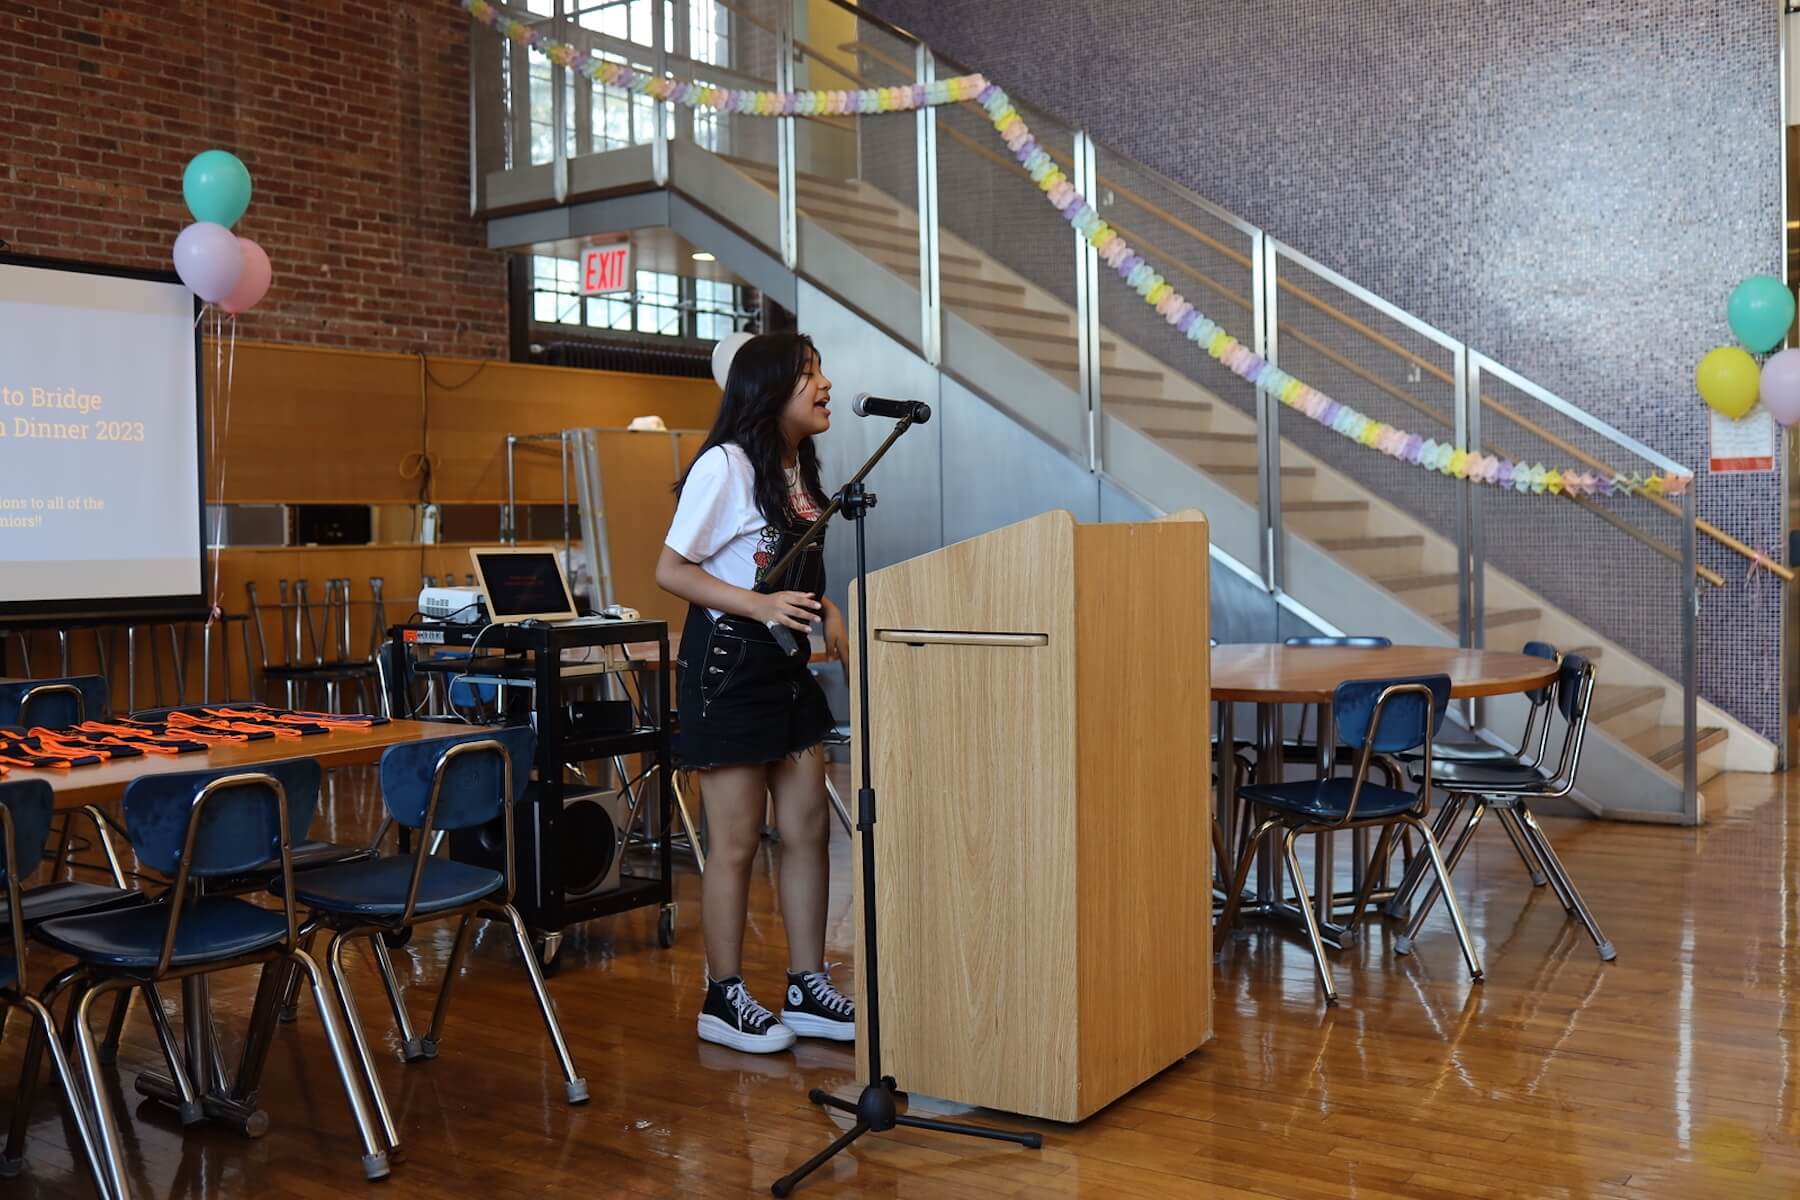 ECFS student speaks at podium at Bridge to Bridge year-end celebration in the Dining Hall.